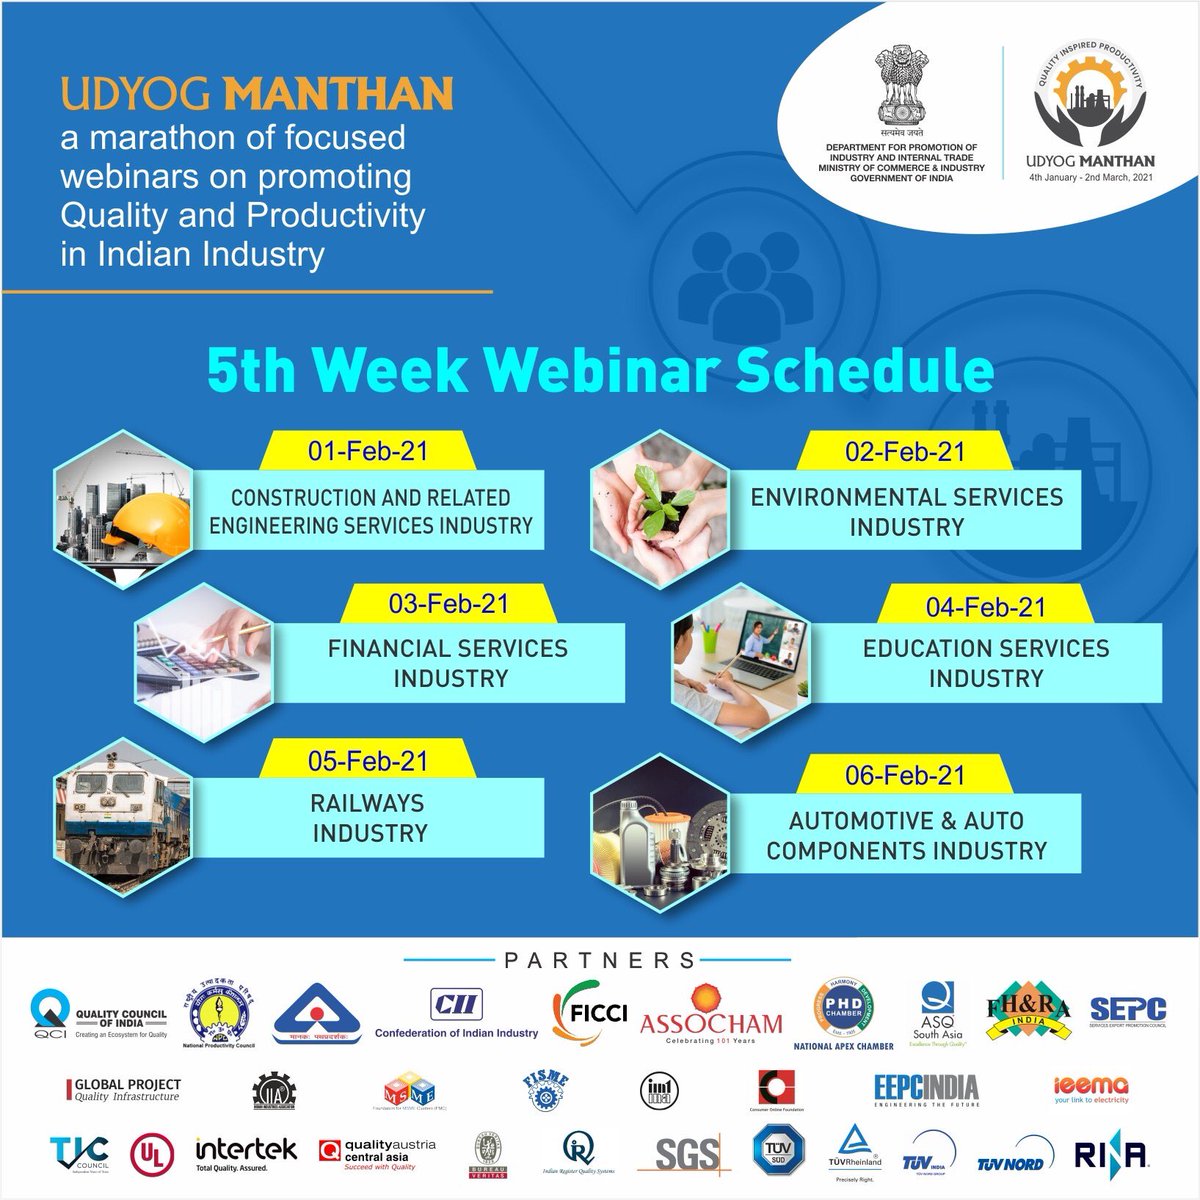 Mark your calendar for the 5th week of #UdyogManthan webinars.

Join this marathon series of focussed & sector-specific webinars on enhancing Quality and Productivity of the Industry.

🌐 Register At: bit.ly/um-form